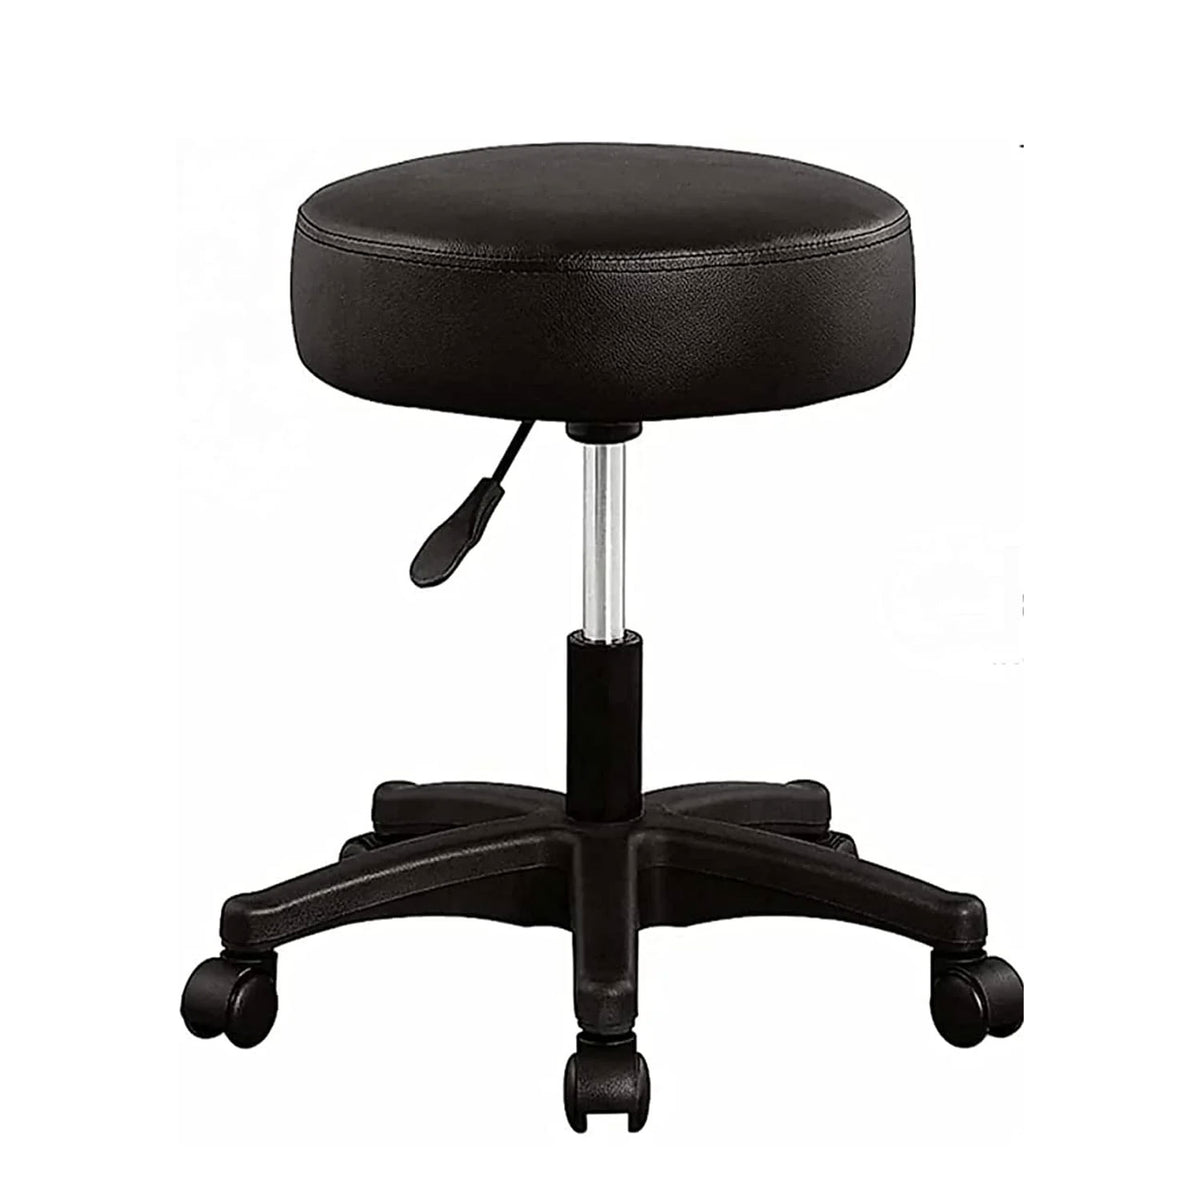 SmileSellers Height-Adjustable revolving Stool with 360-degree pivoting caster wheels |great for use in Salons, Bar, Schools, Hospital, Offices, Warehouses, Home or garage | black coloured | height extendable from 17 inch to 22 inch